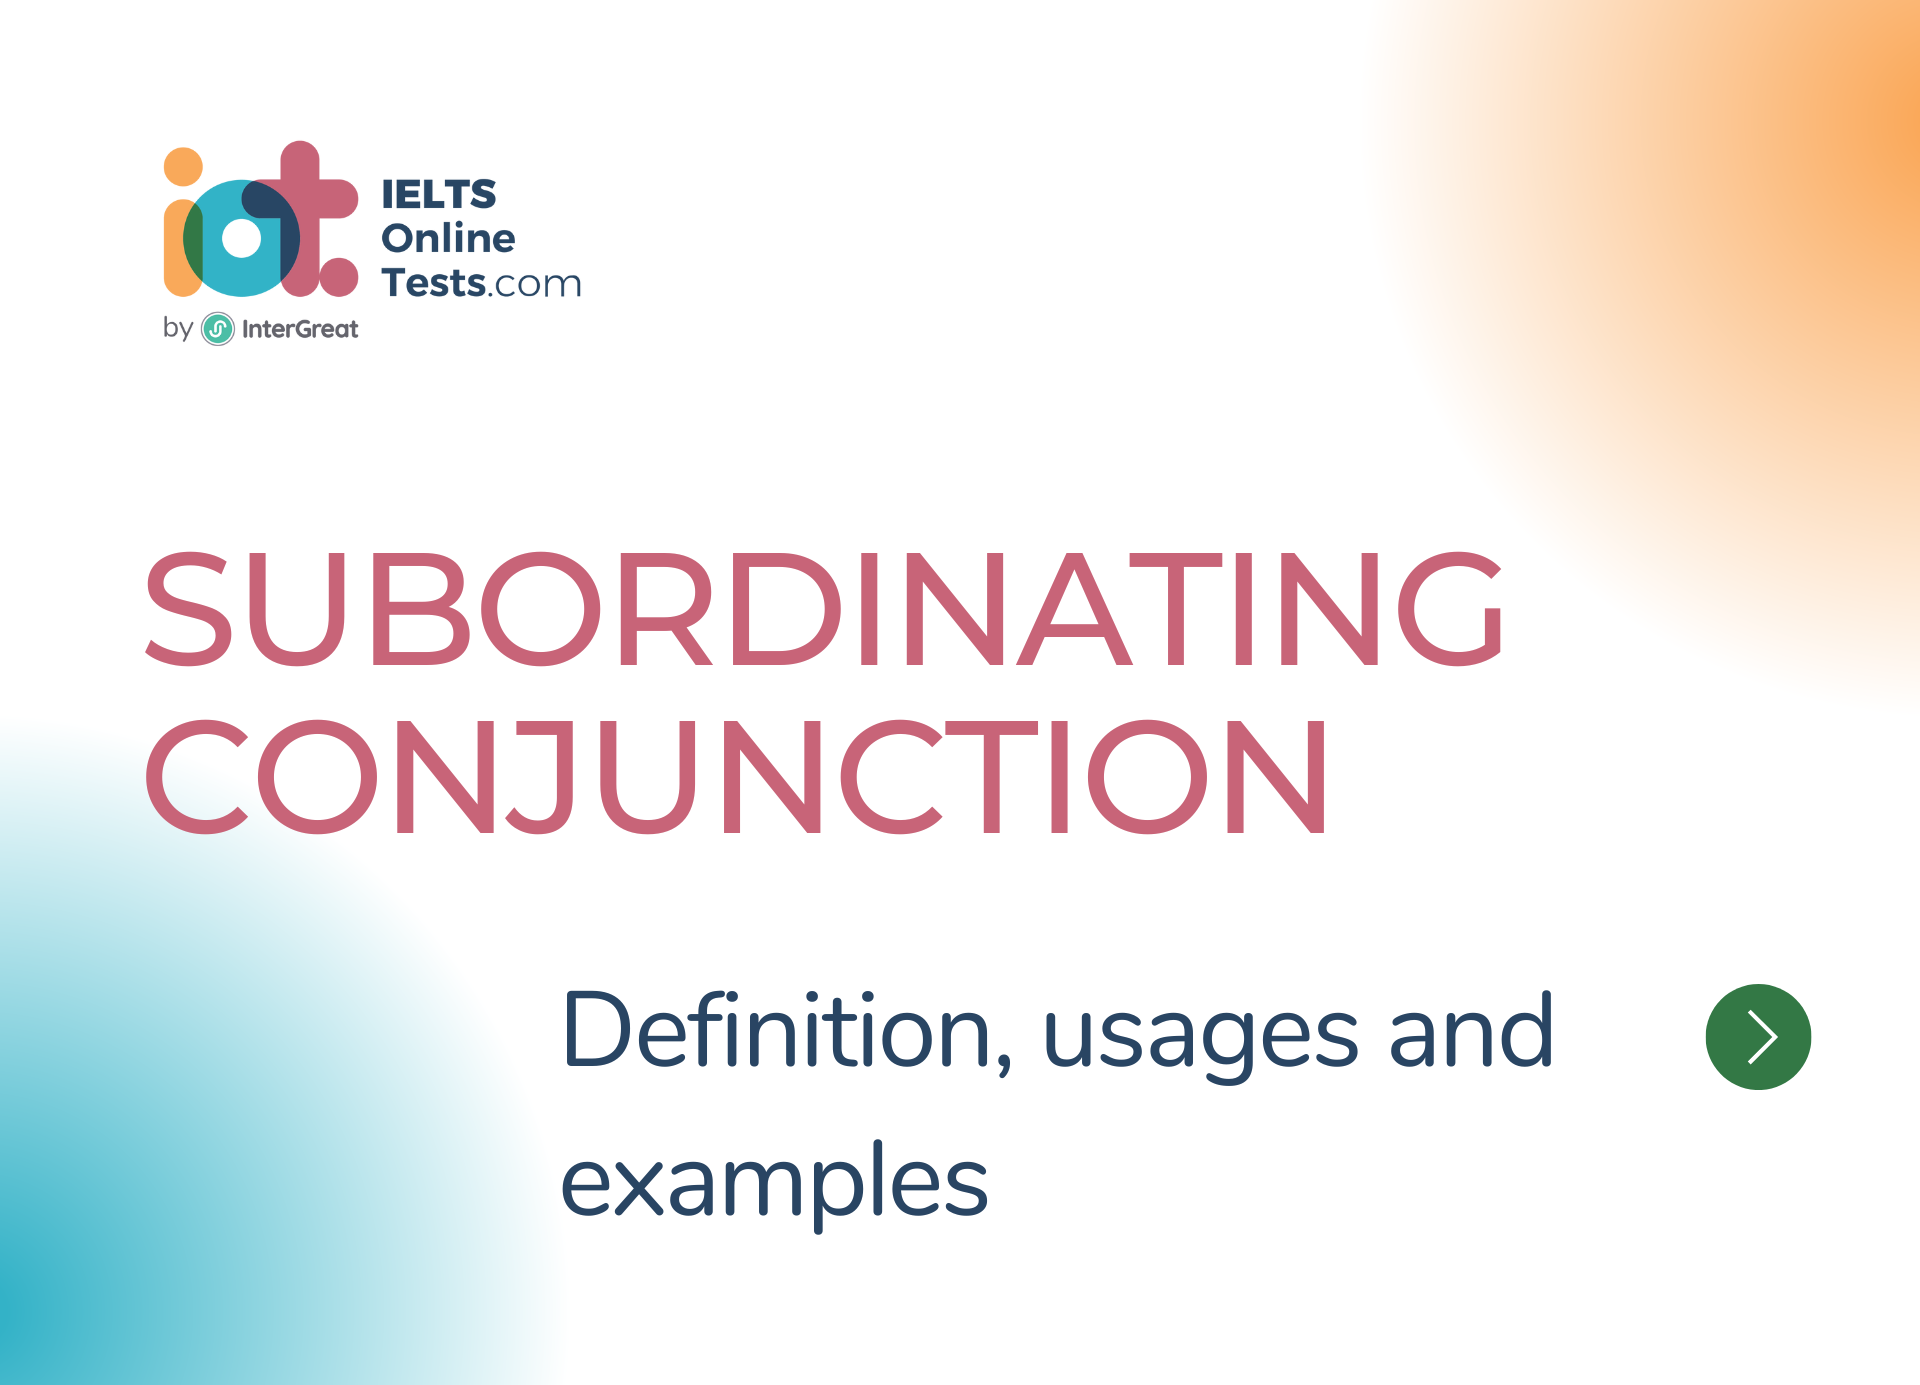 Subordinating conjunction definition, usages and examples